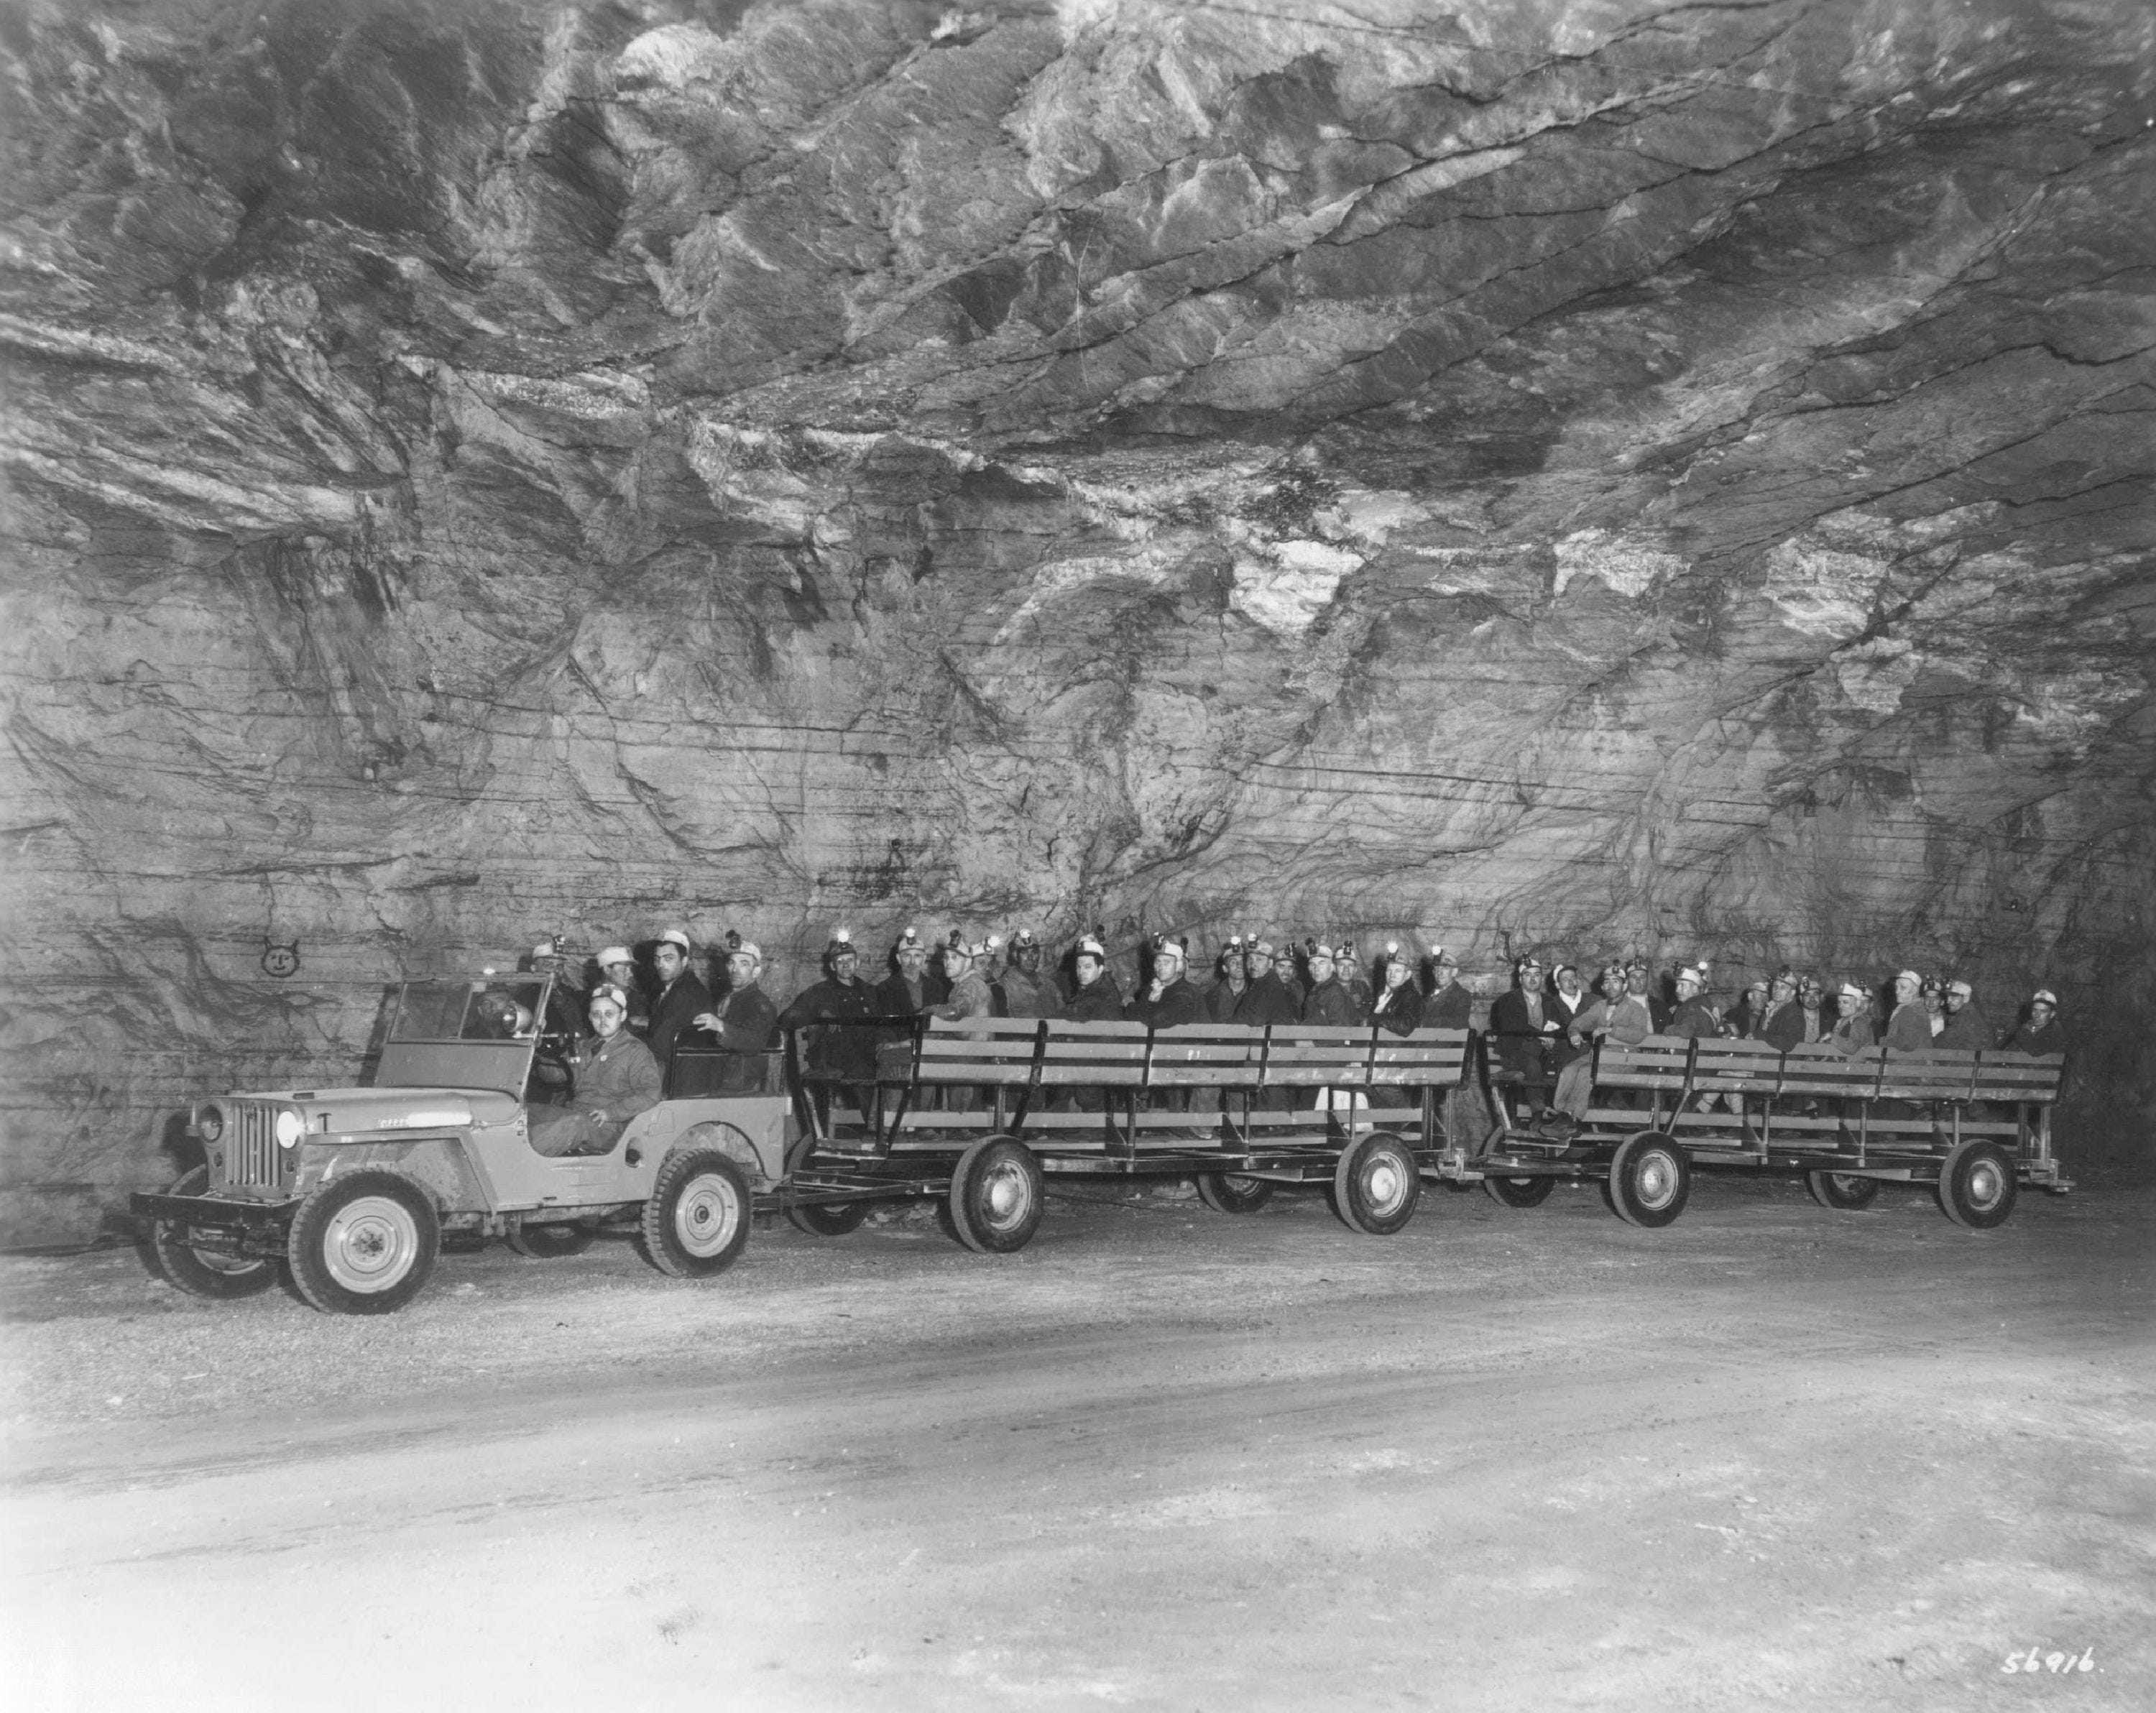 Over roads of pure salt a Jeep pulls men from the shaft bottom of the Detroit mine of the International Salt Company, October 20, 1950.  They travel a distance of 11/2 miles to and from the working places 1,137 feet beneath Detroit, where the air temperature is always 56 degrees the year round.